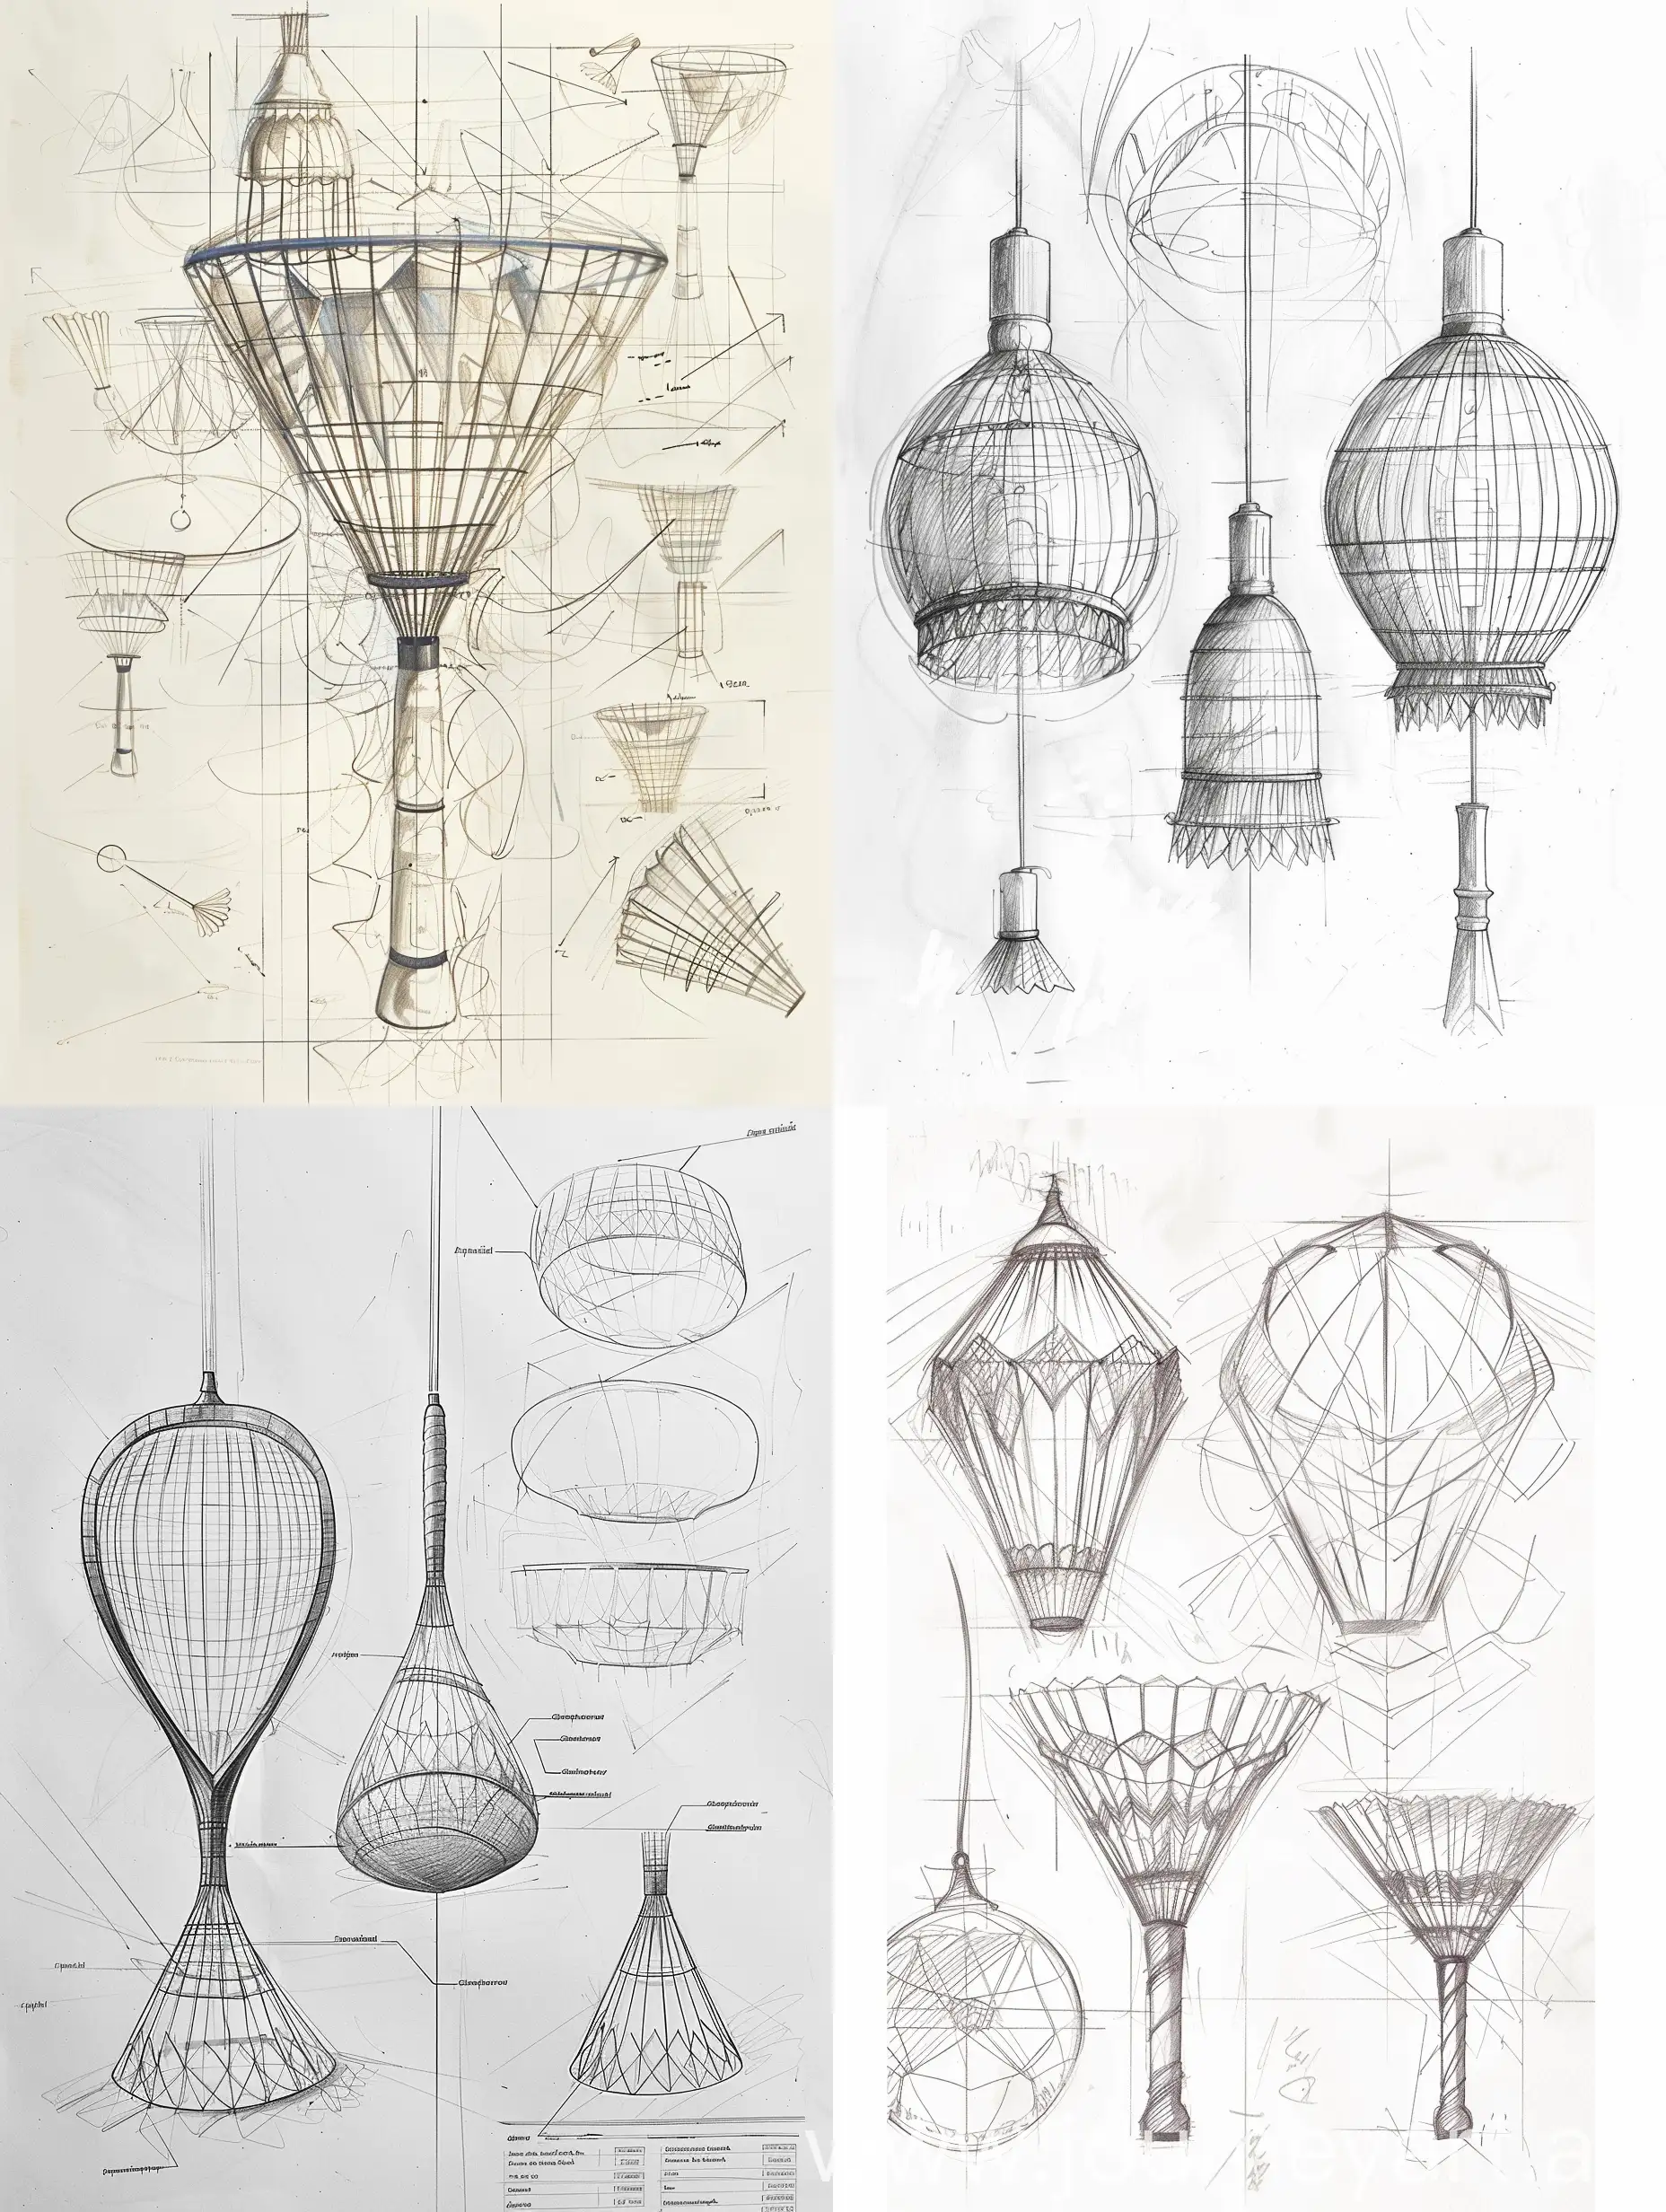 Lighting design, extract the elements of badminton, bionic its texture, bionic form deduction change process, content: form source, form change, elaboration, summary process, how to draw lamps (chandeliers
(wall lamp), drawing reference, product design sketch, white background, front view, side view, back view, wire frame, do not need text, different angles of the sketch, do not use any color, pencil line manuscript, each scheme needs to present the form source and intention, shape change deliberation process; And the means to reconstruct and evolve the initial body form. The content includes the source of form, the change of form, the elaboration and the generalization process